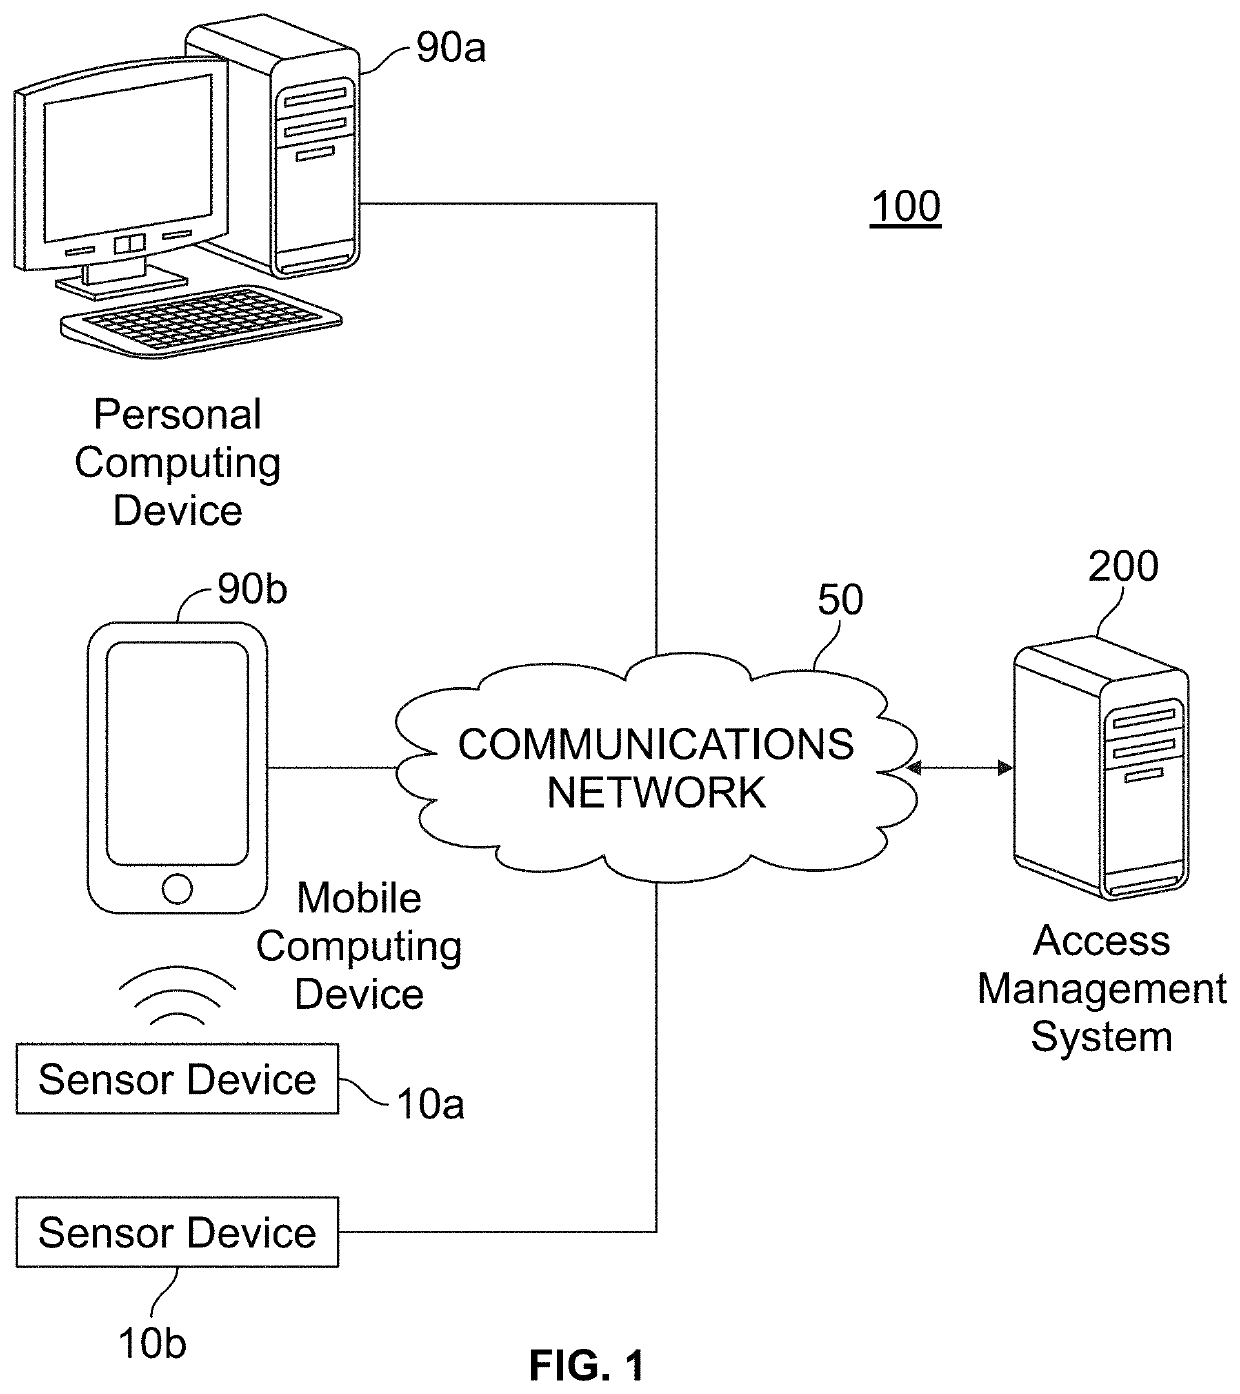 Behavior-based access control management for application software of computing devices